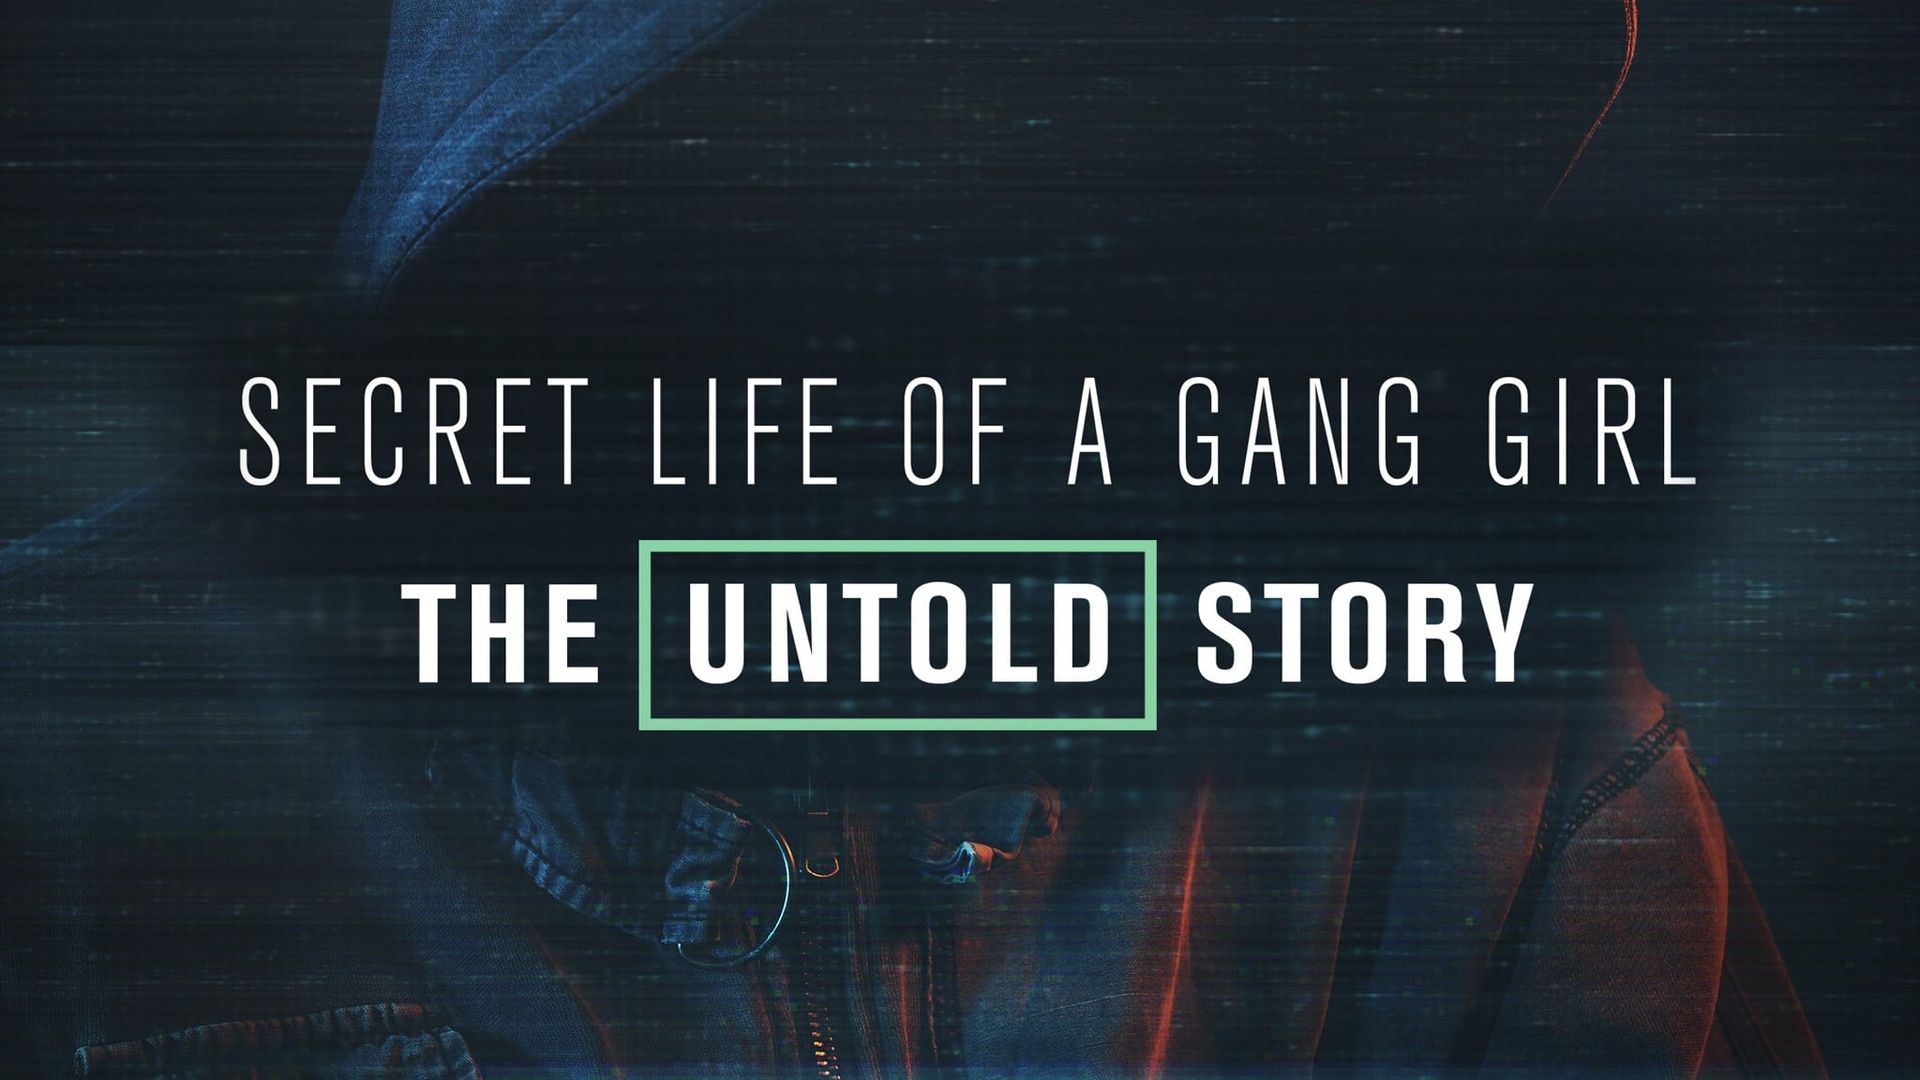 The Untold Story background